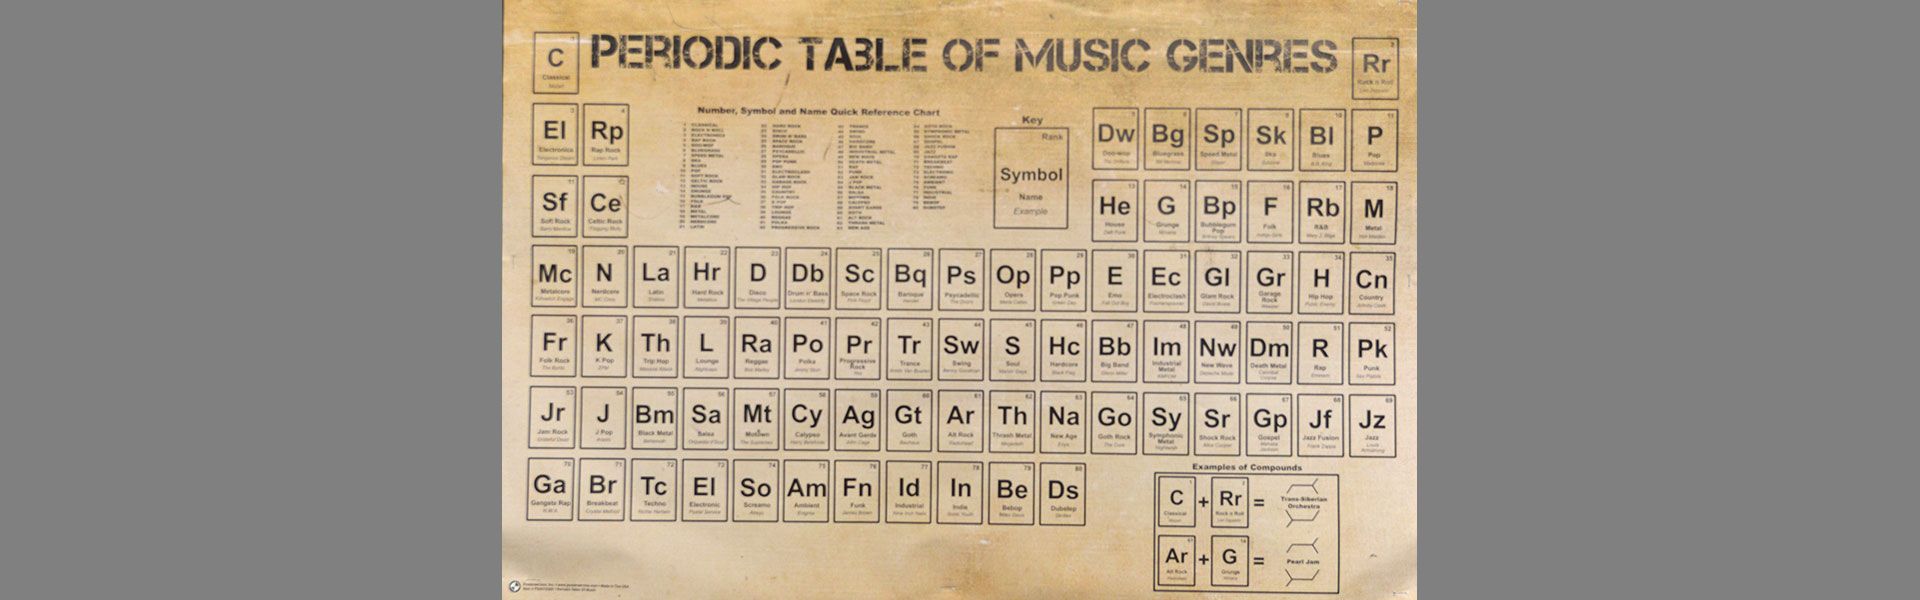 Music Genres Table